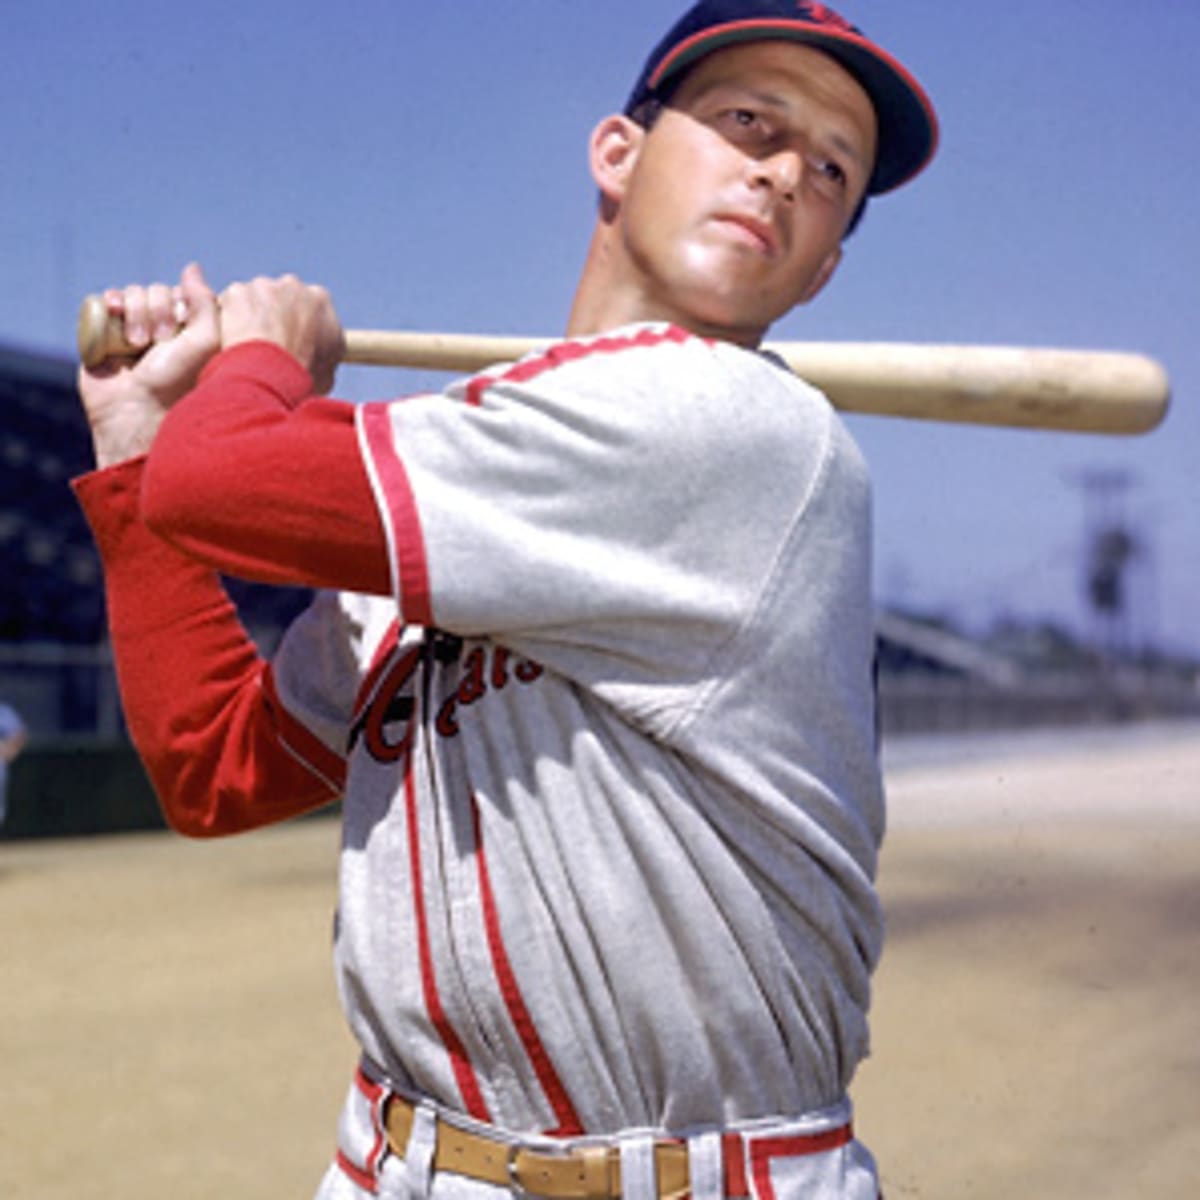 Stan Musial: Heaven's Outfielder, Our 'Man' - Pretty Extraordinary